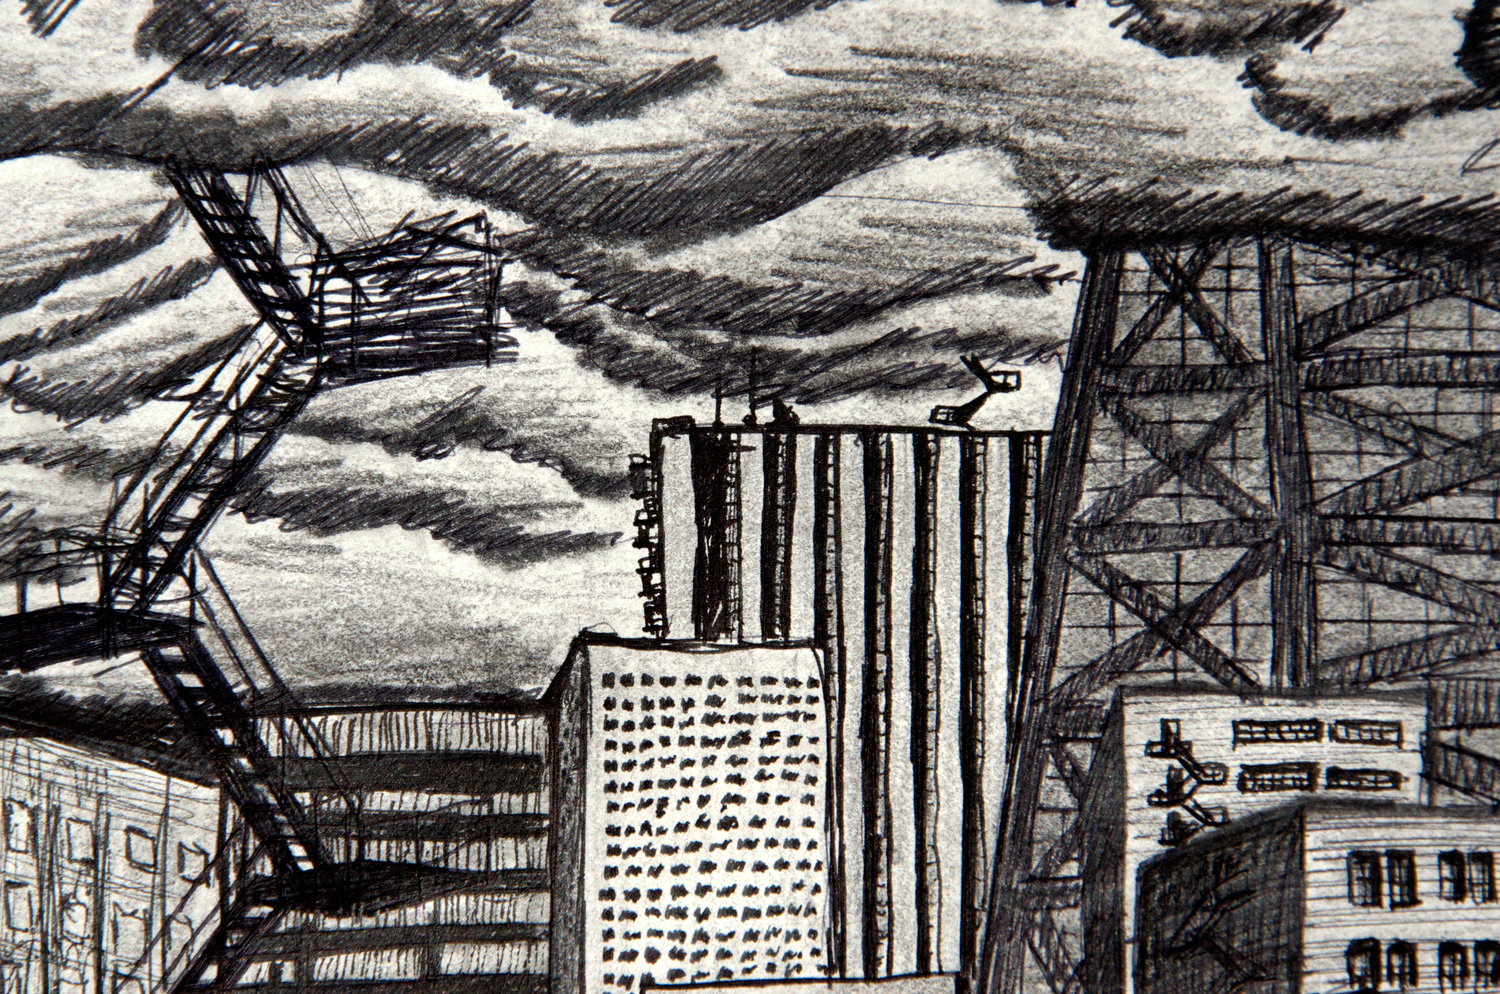 Fire Escape drawing (Chicago imaginary cityscape), by Billy Reiter